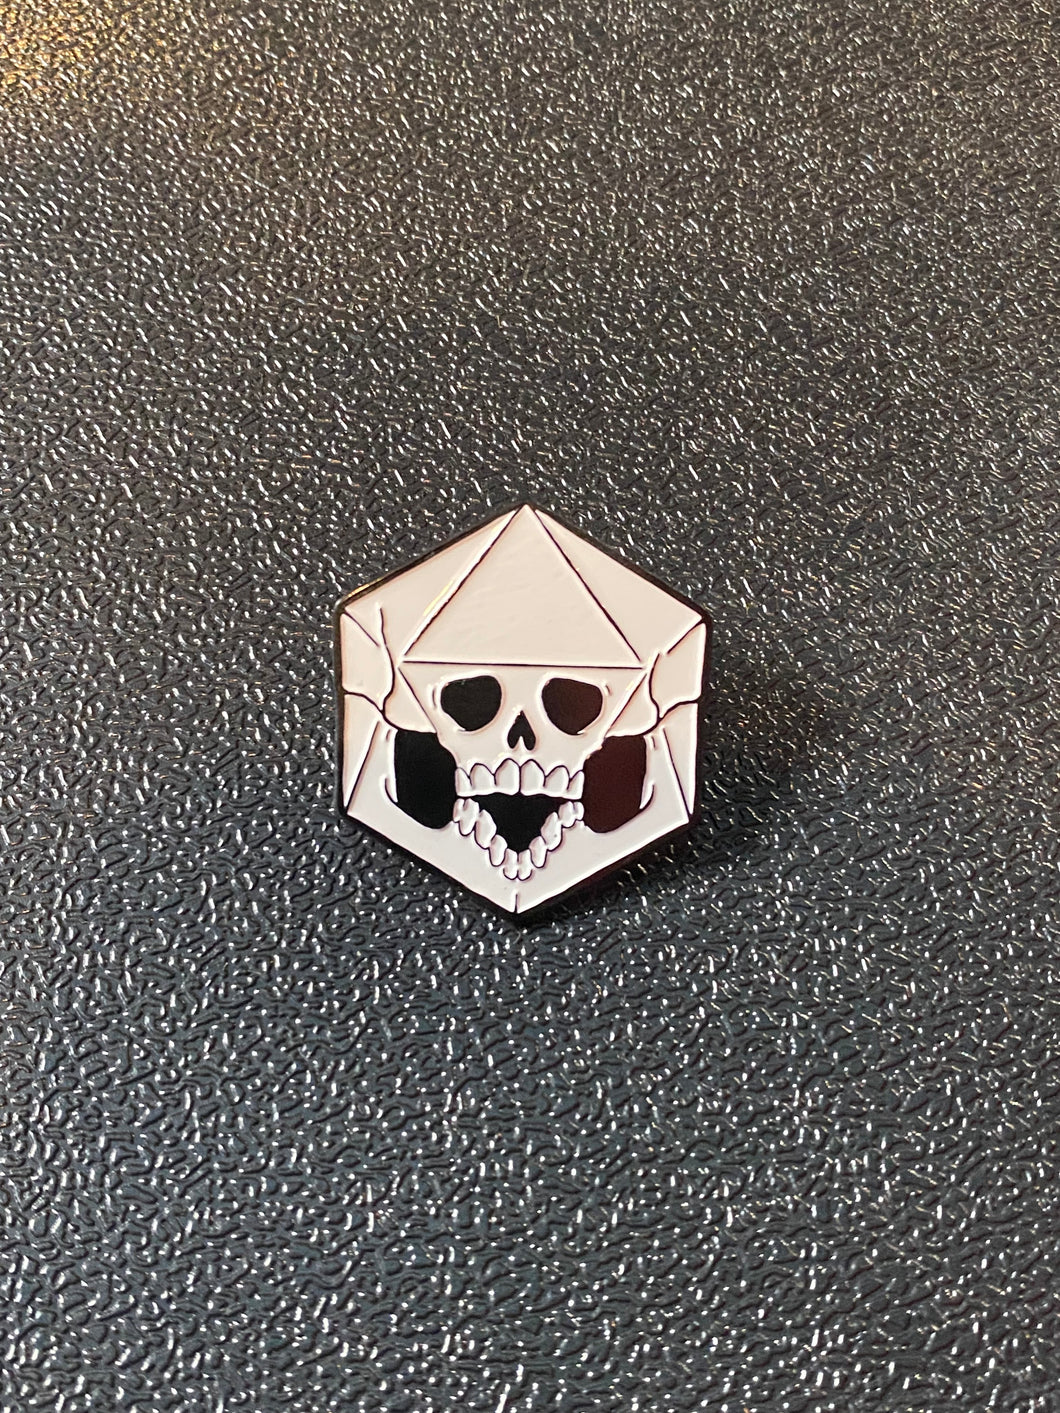 This Pin is Cursed | D20 Skull Pin